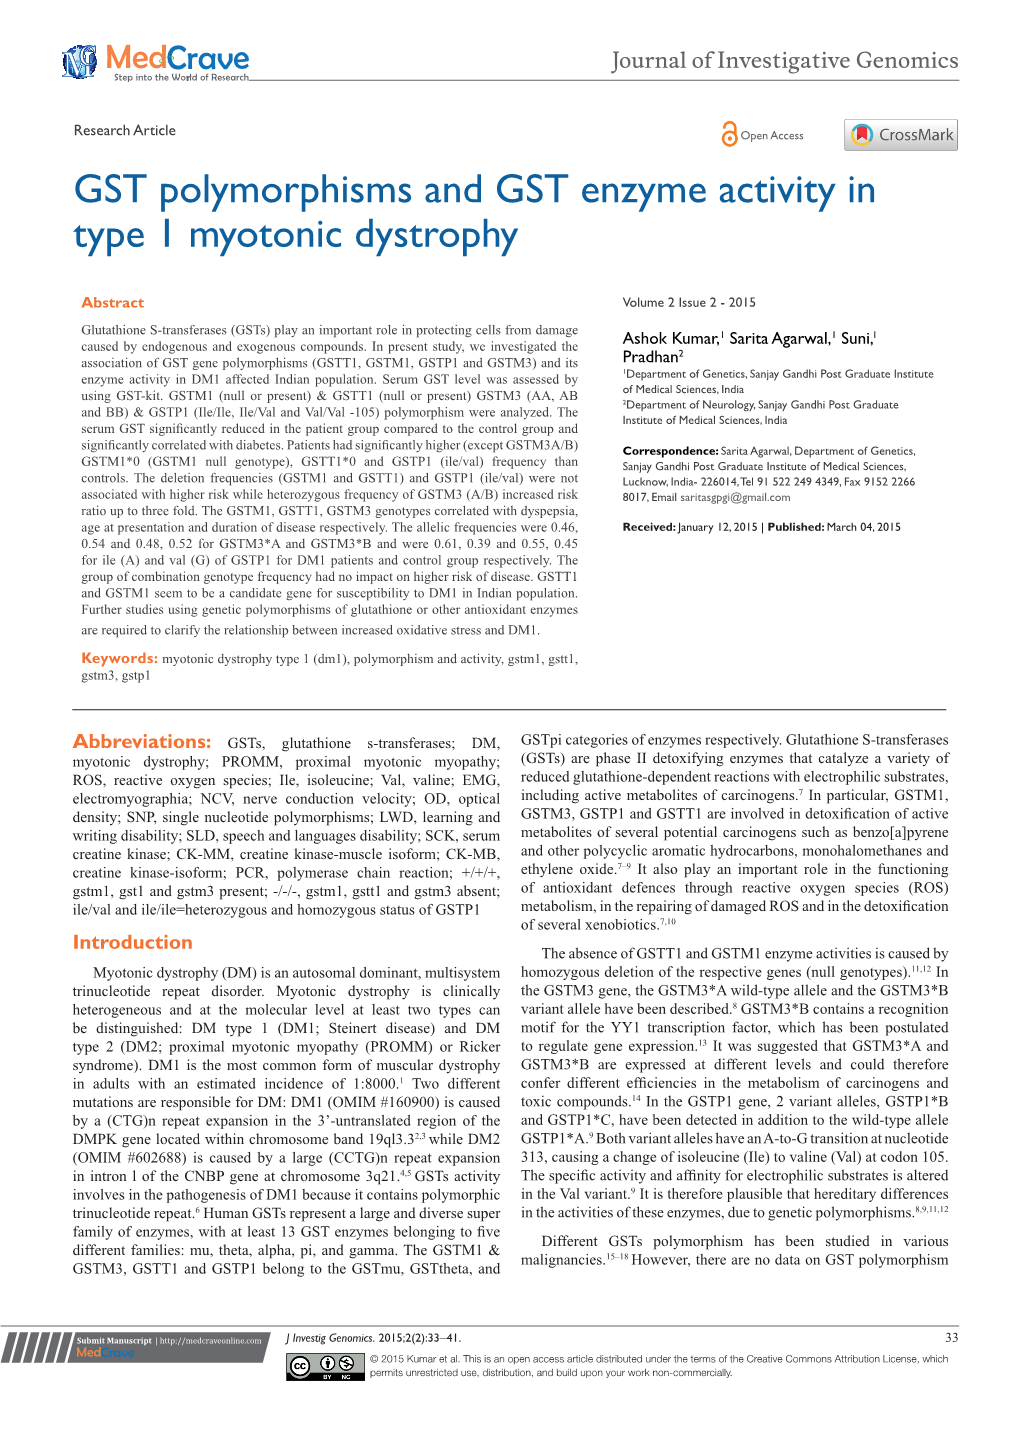 GST Polymorphisms and GST Enzyme Activity in Type 1 Myotonic Dystrophy